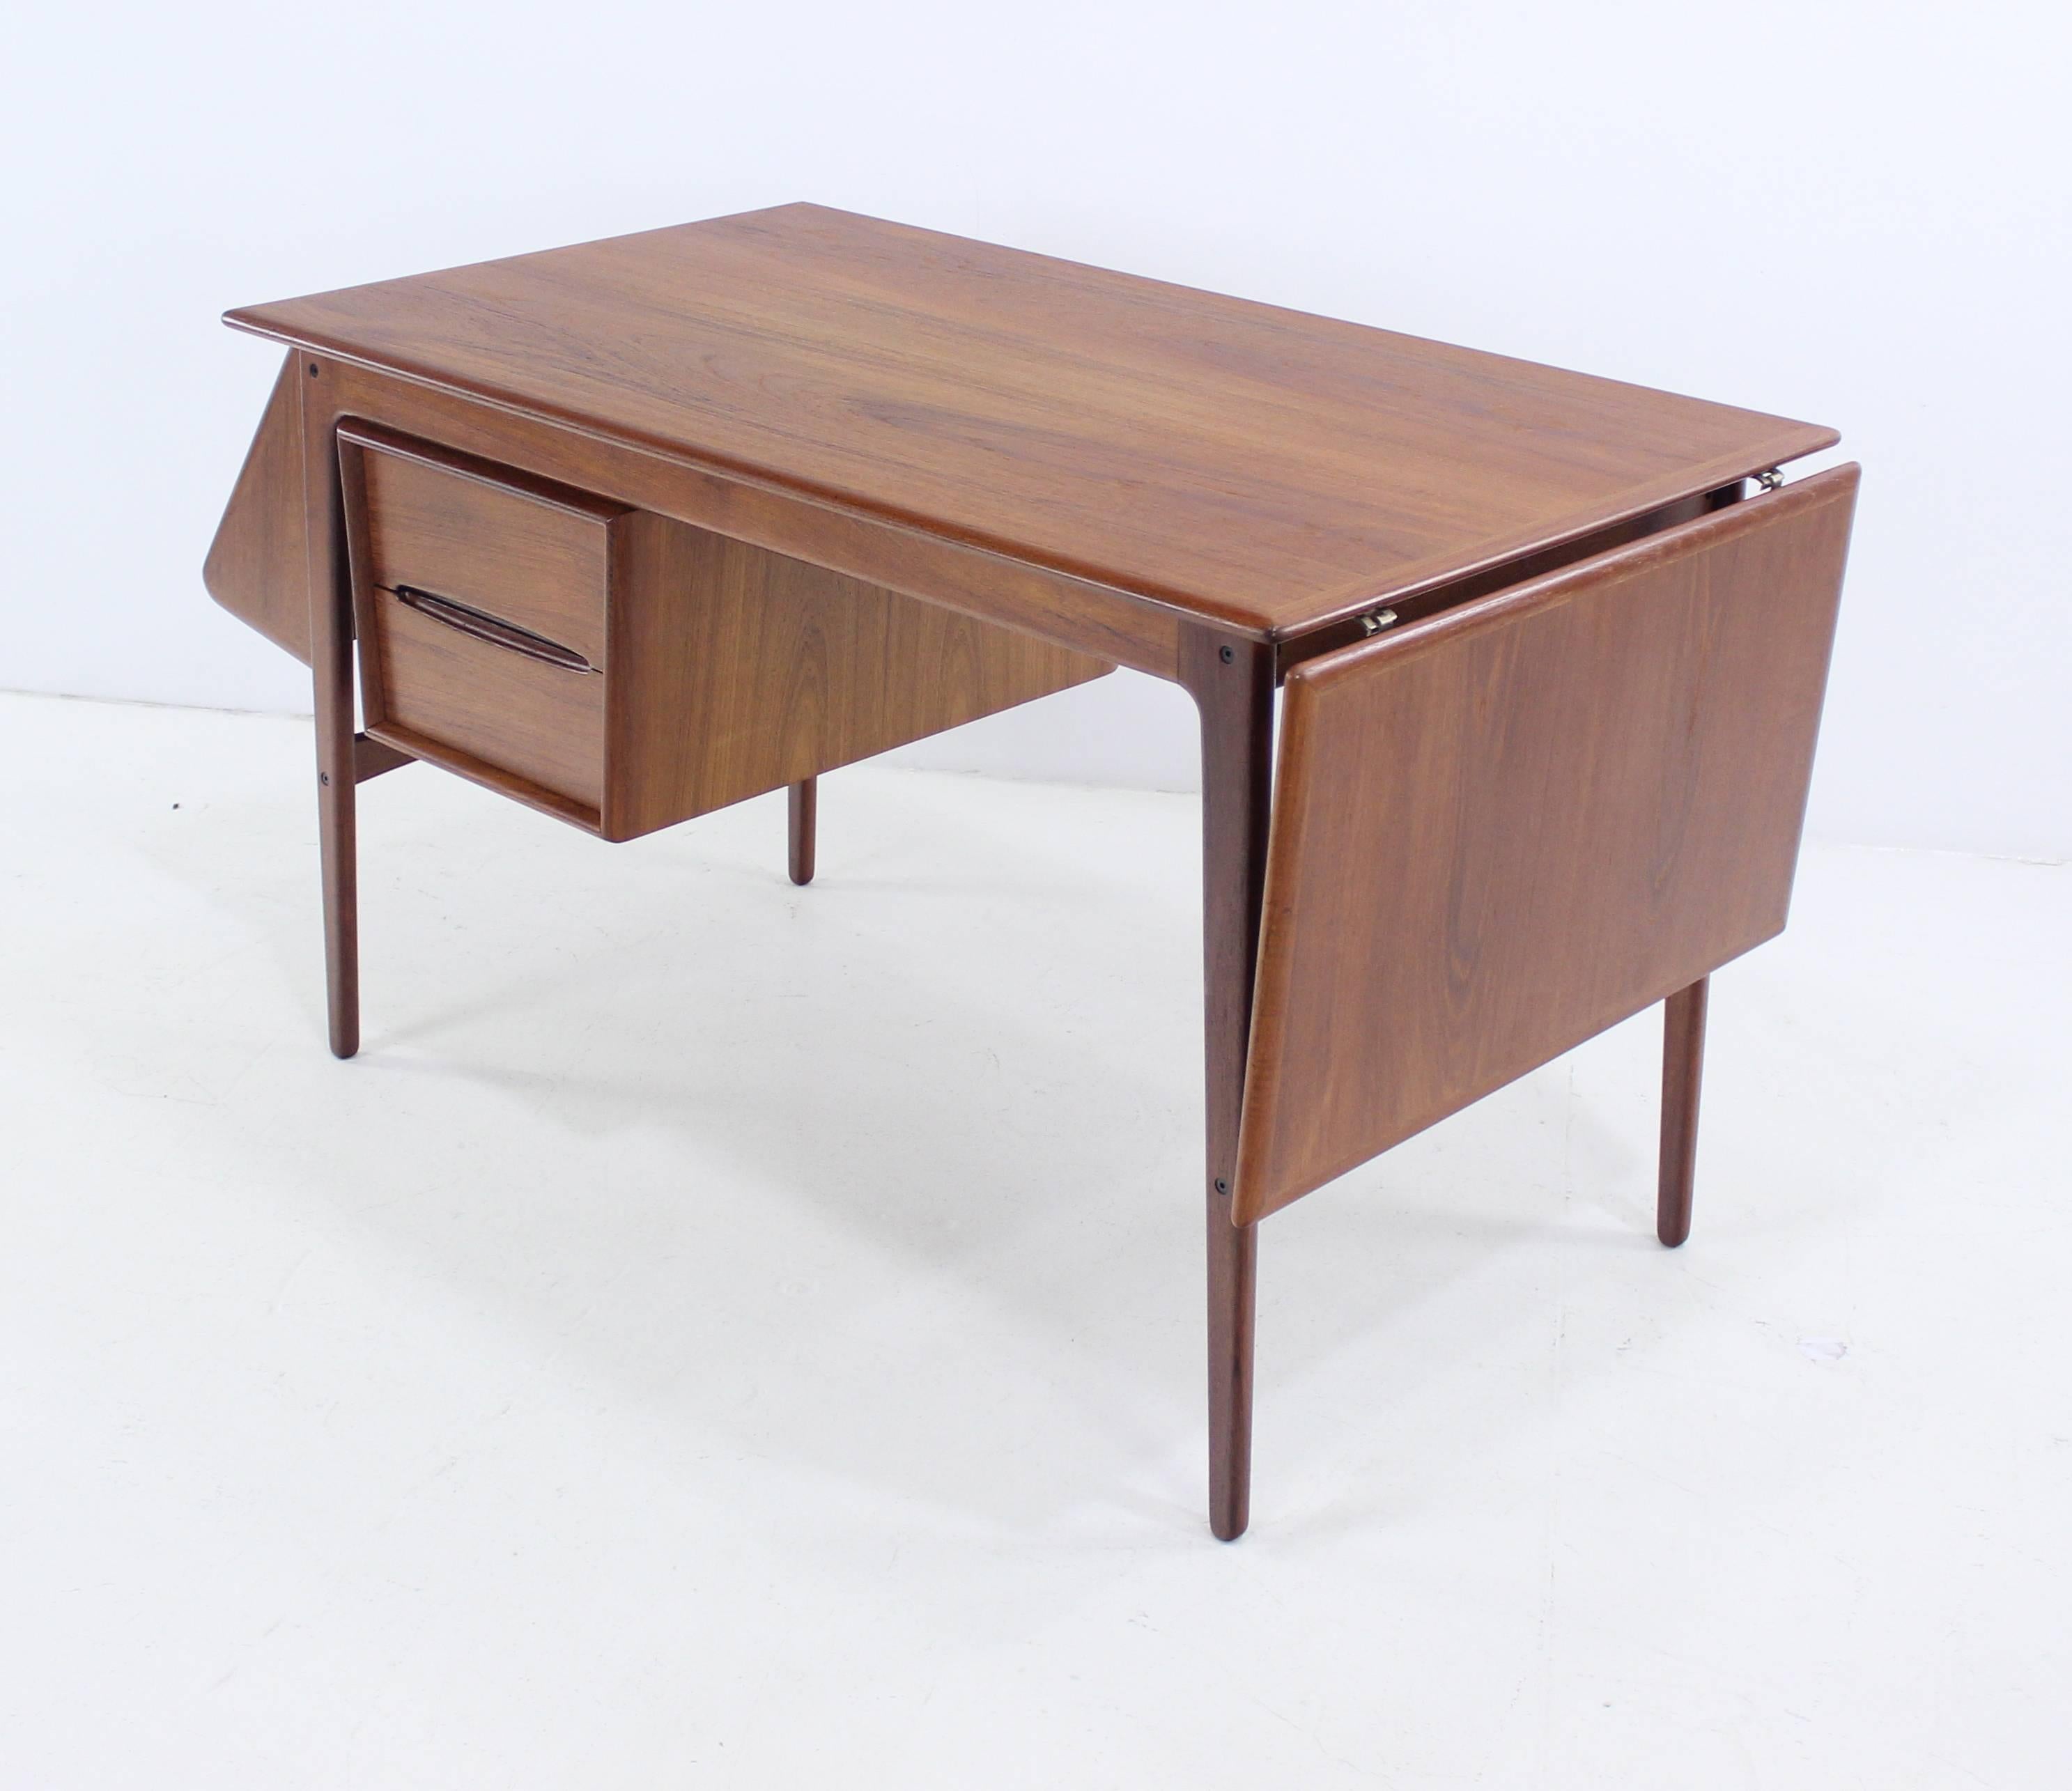 Danish modern desk by Aksel Boll Jensen.
Rich teak.
Drop-leaf provides superior versatility and overall width of 68".
Two drawer unit positionable from left to right.
Book shelf on left.
Ultimate function and adaptability.
Professionally